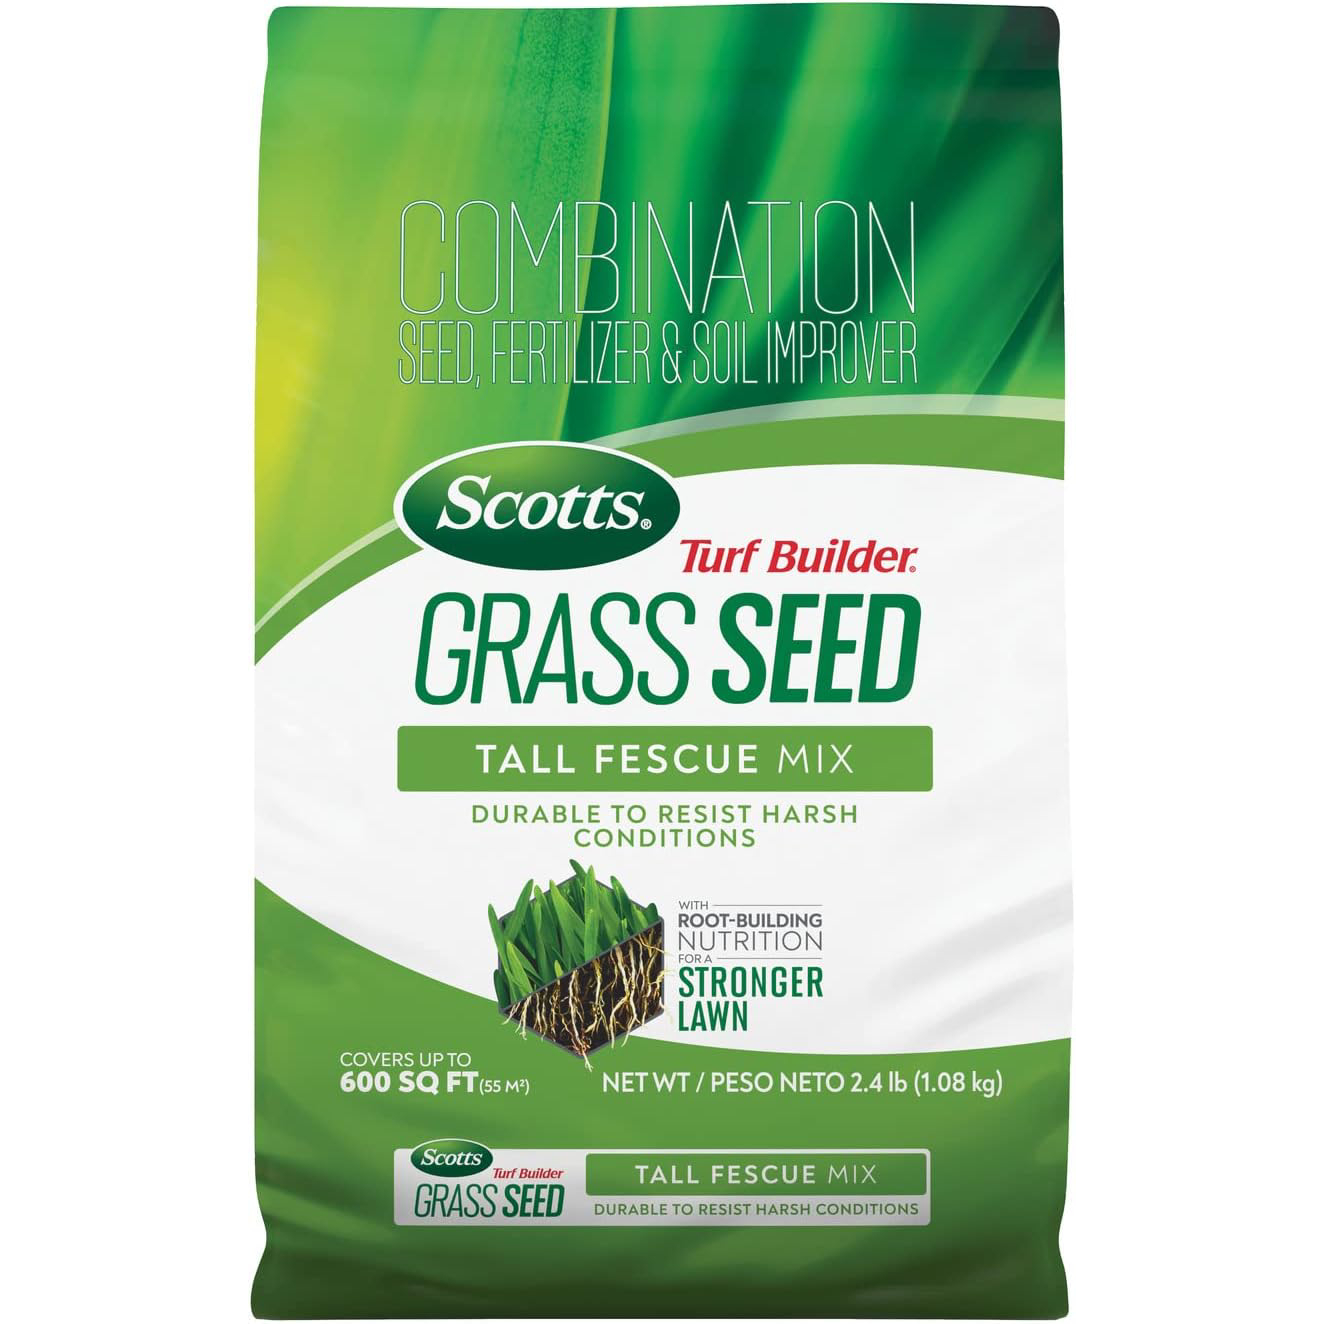 Scotts Turf Builder Grass Seed Tall Fescue Mix 